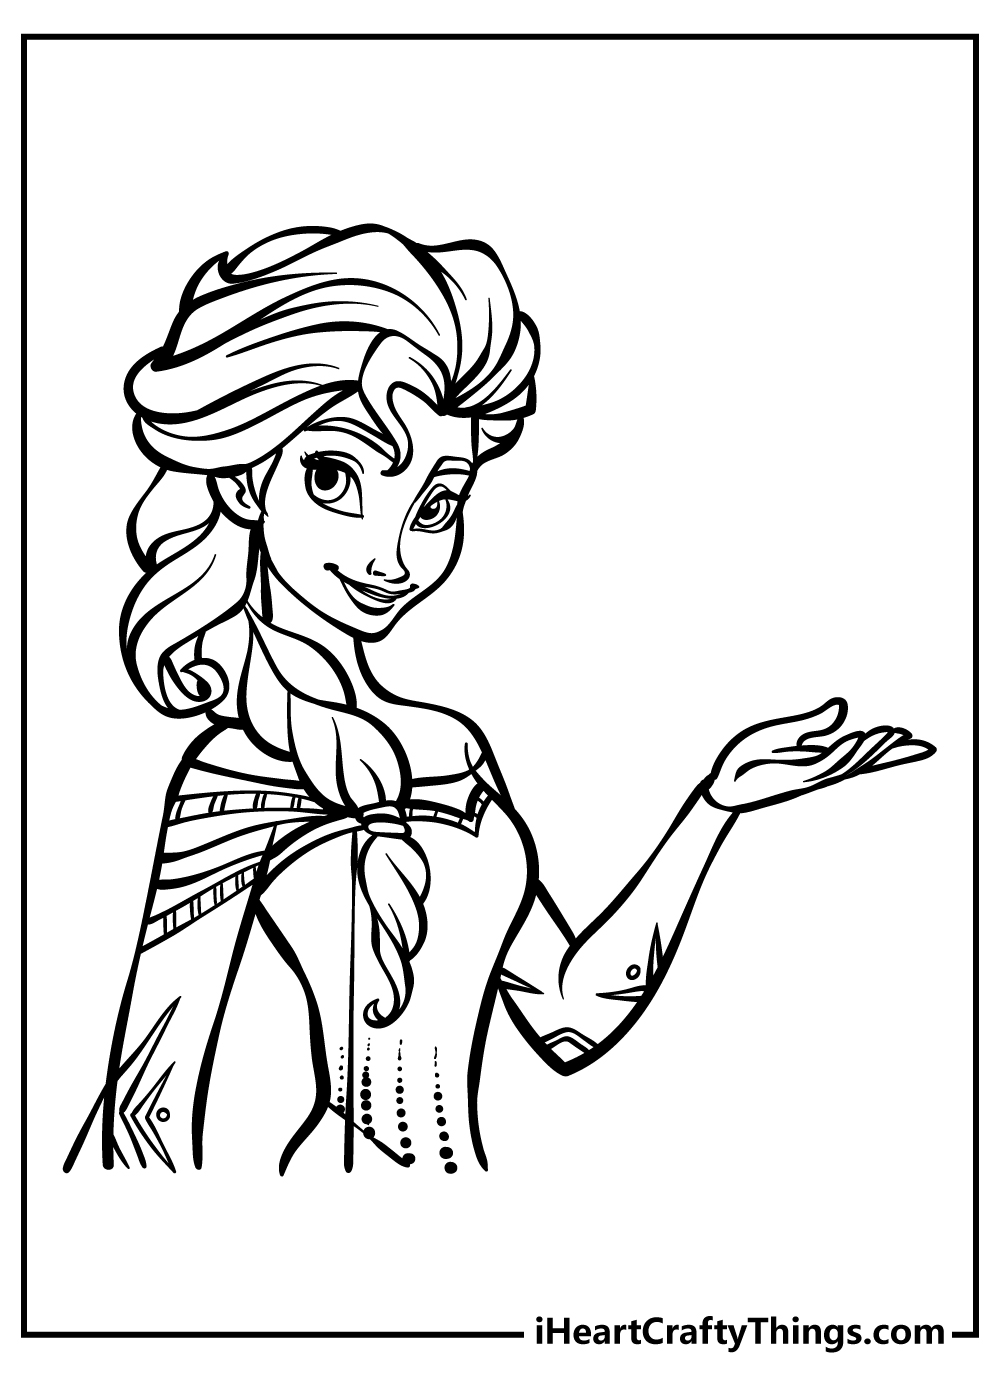 Elsa Coloring Pages for preschoolers free printable